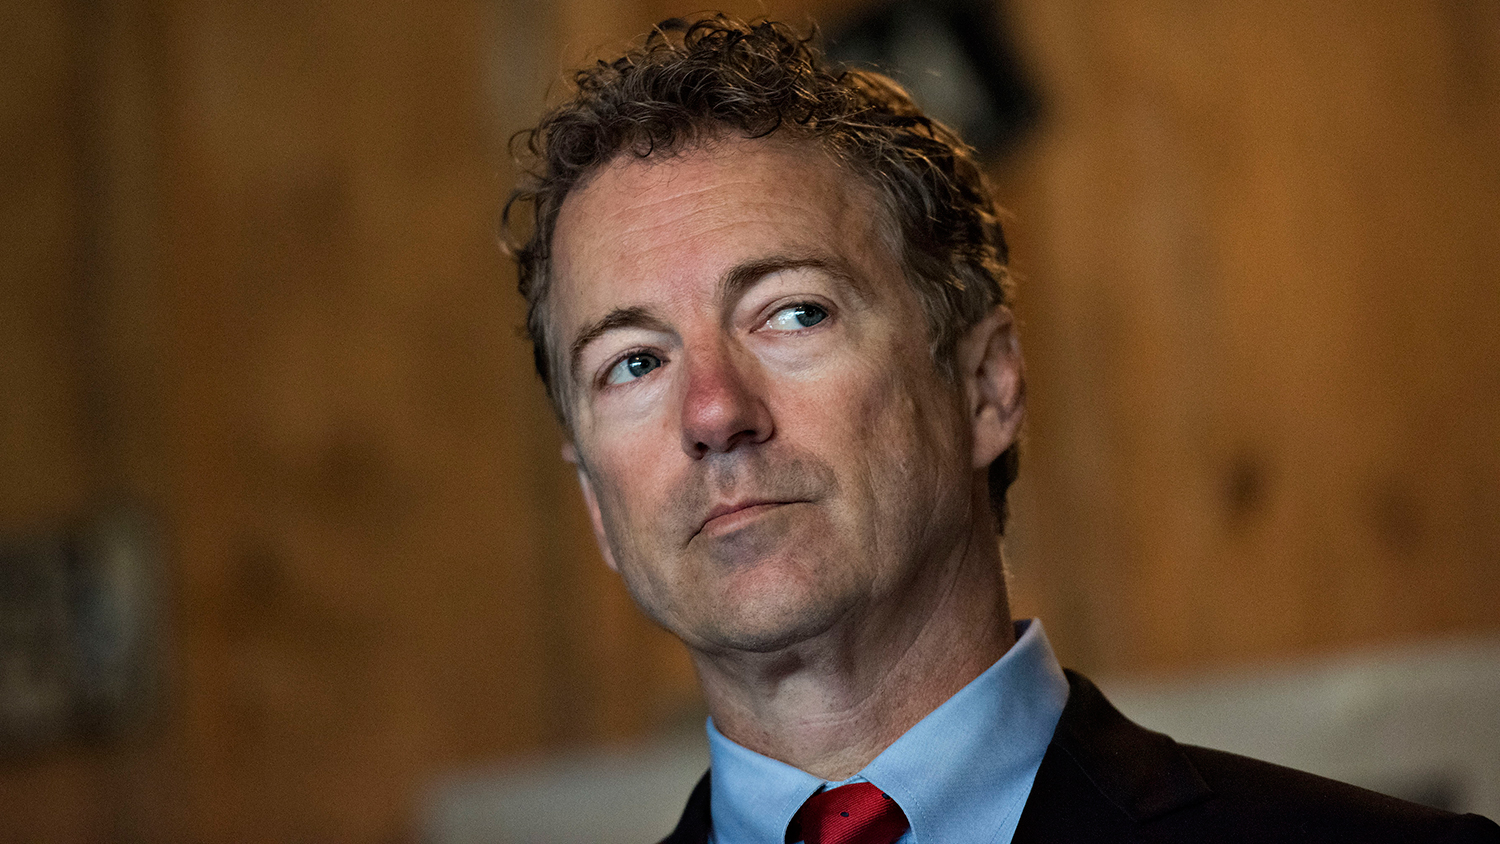 U.S. Senator Rand Paul, a Republican from Kentucky and presidential candidate, listens during a campaign stop in Atkins, Iowa, U.S., on Saturday, April 25, 2015.
